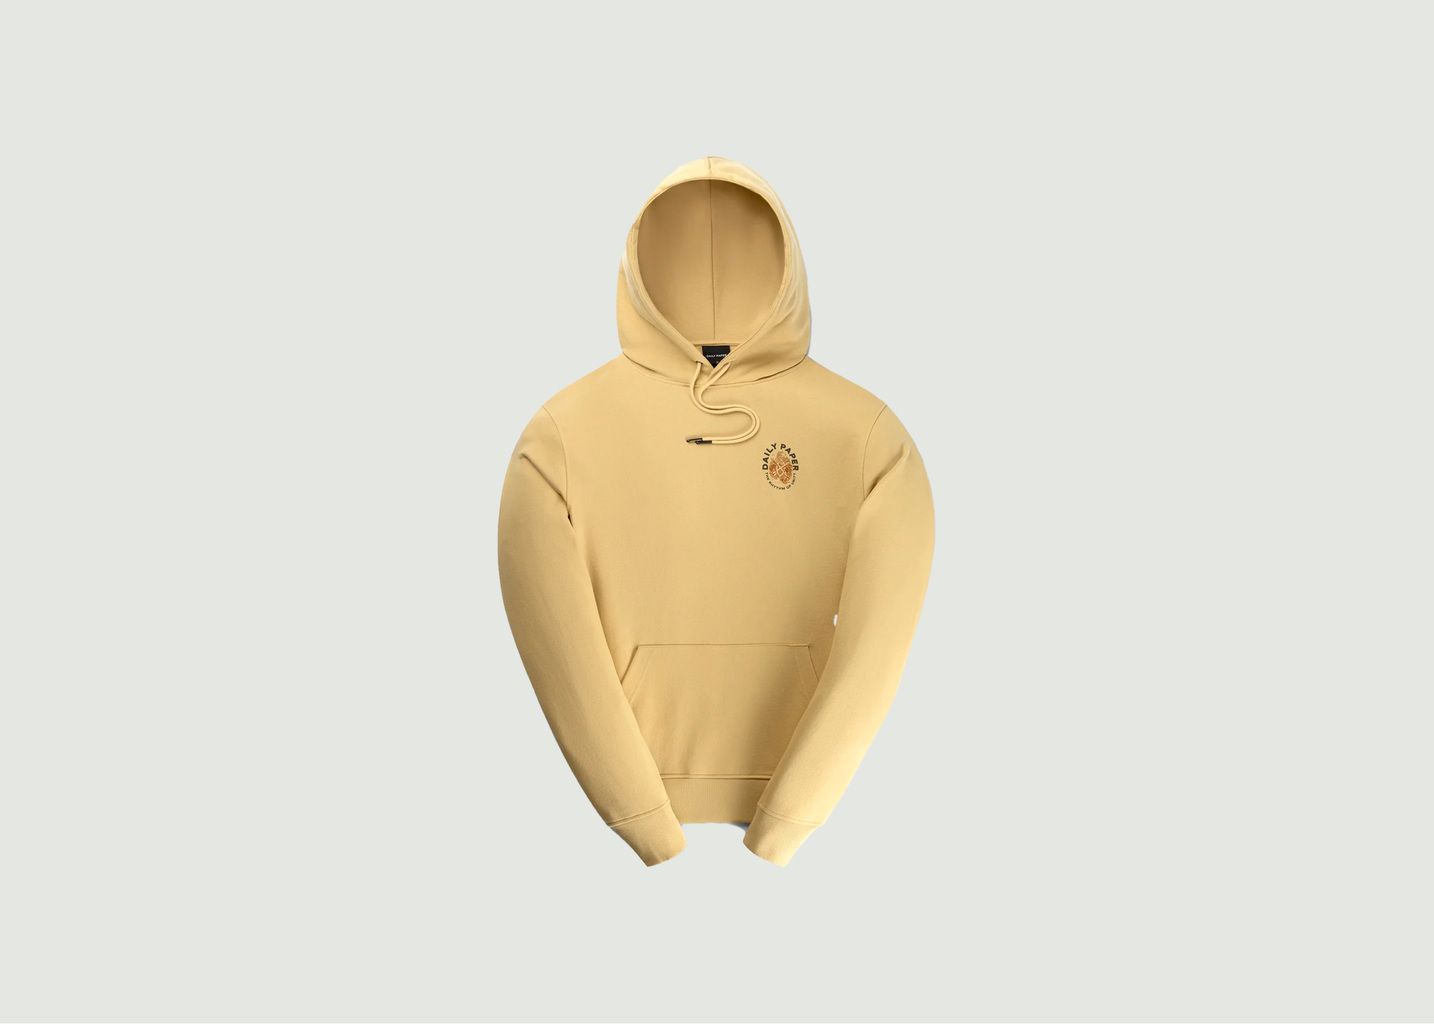 Daily Paper Identity Hoodie